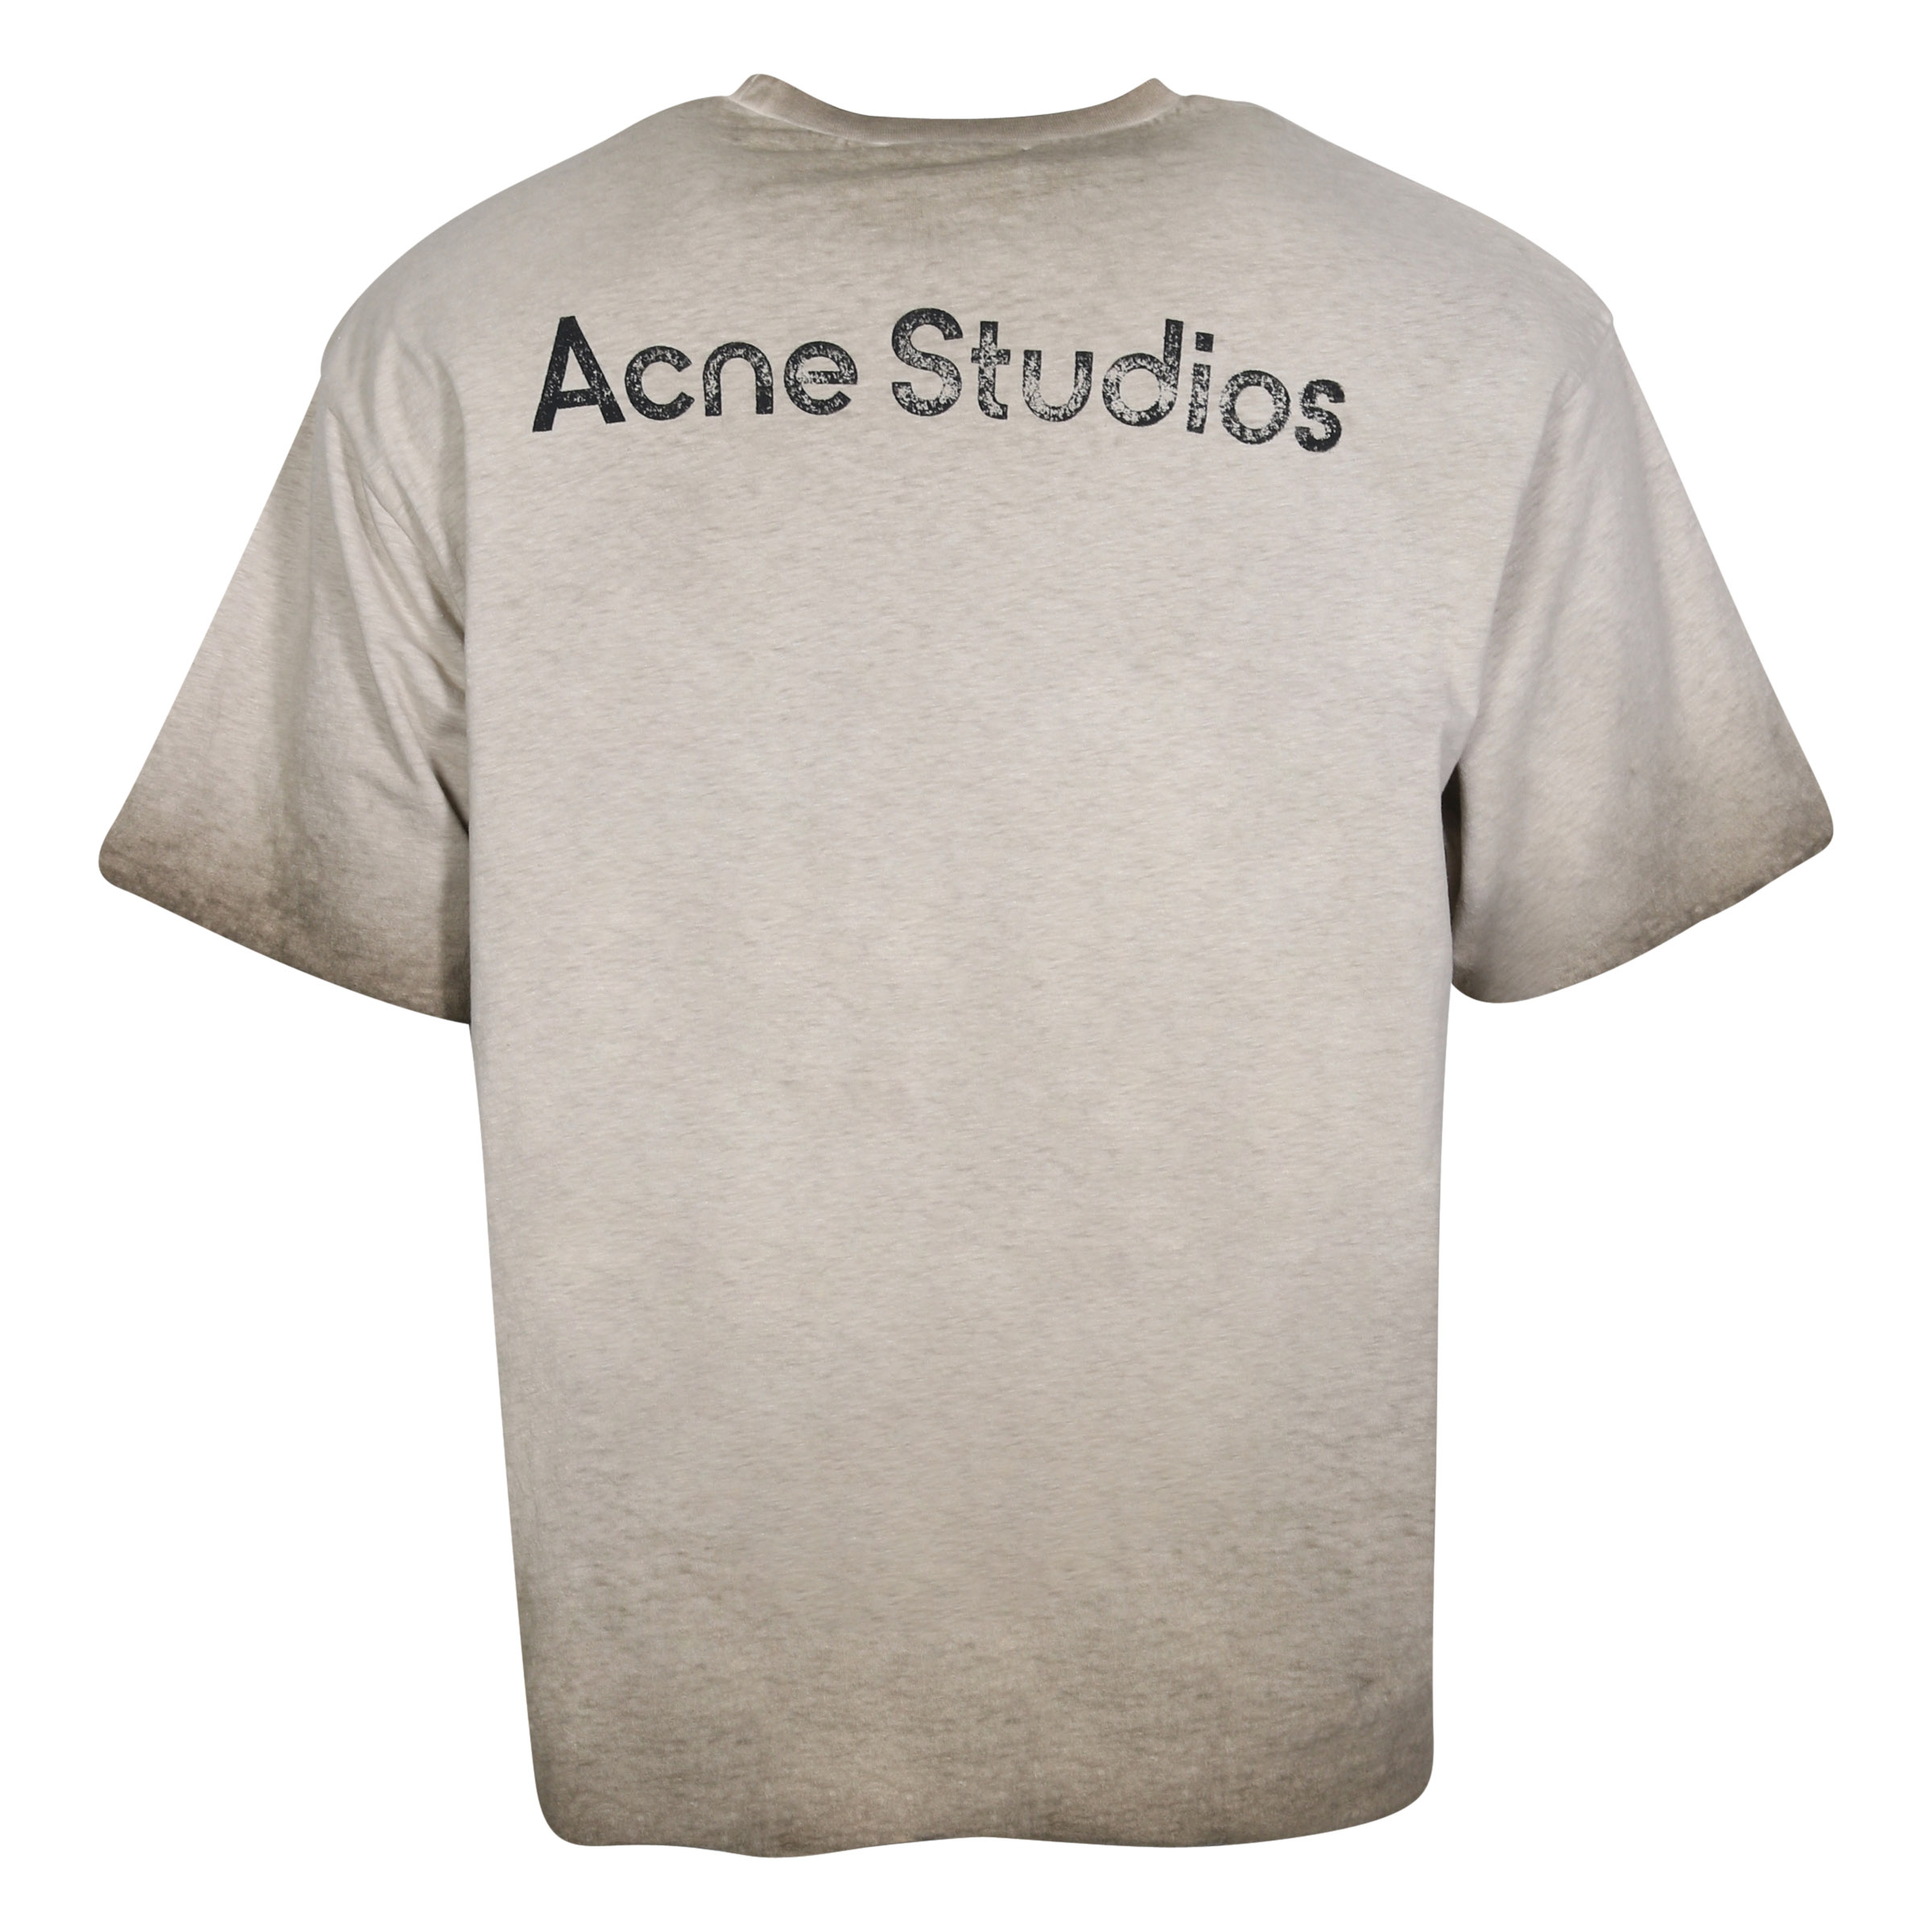 Acne Studios Double Layered T-Shirt in Dusty Brown Back Printed